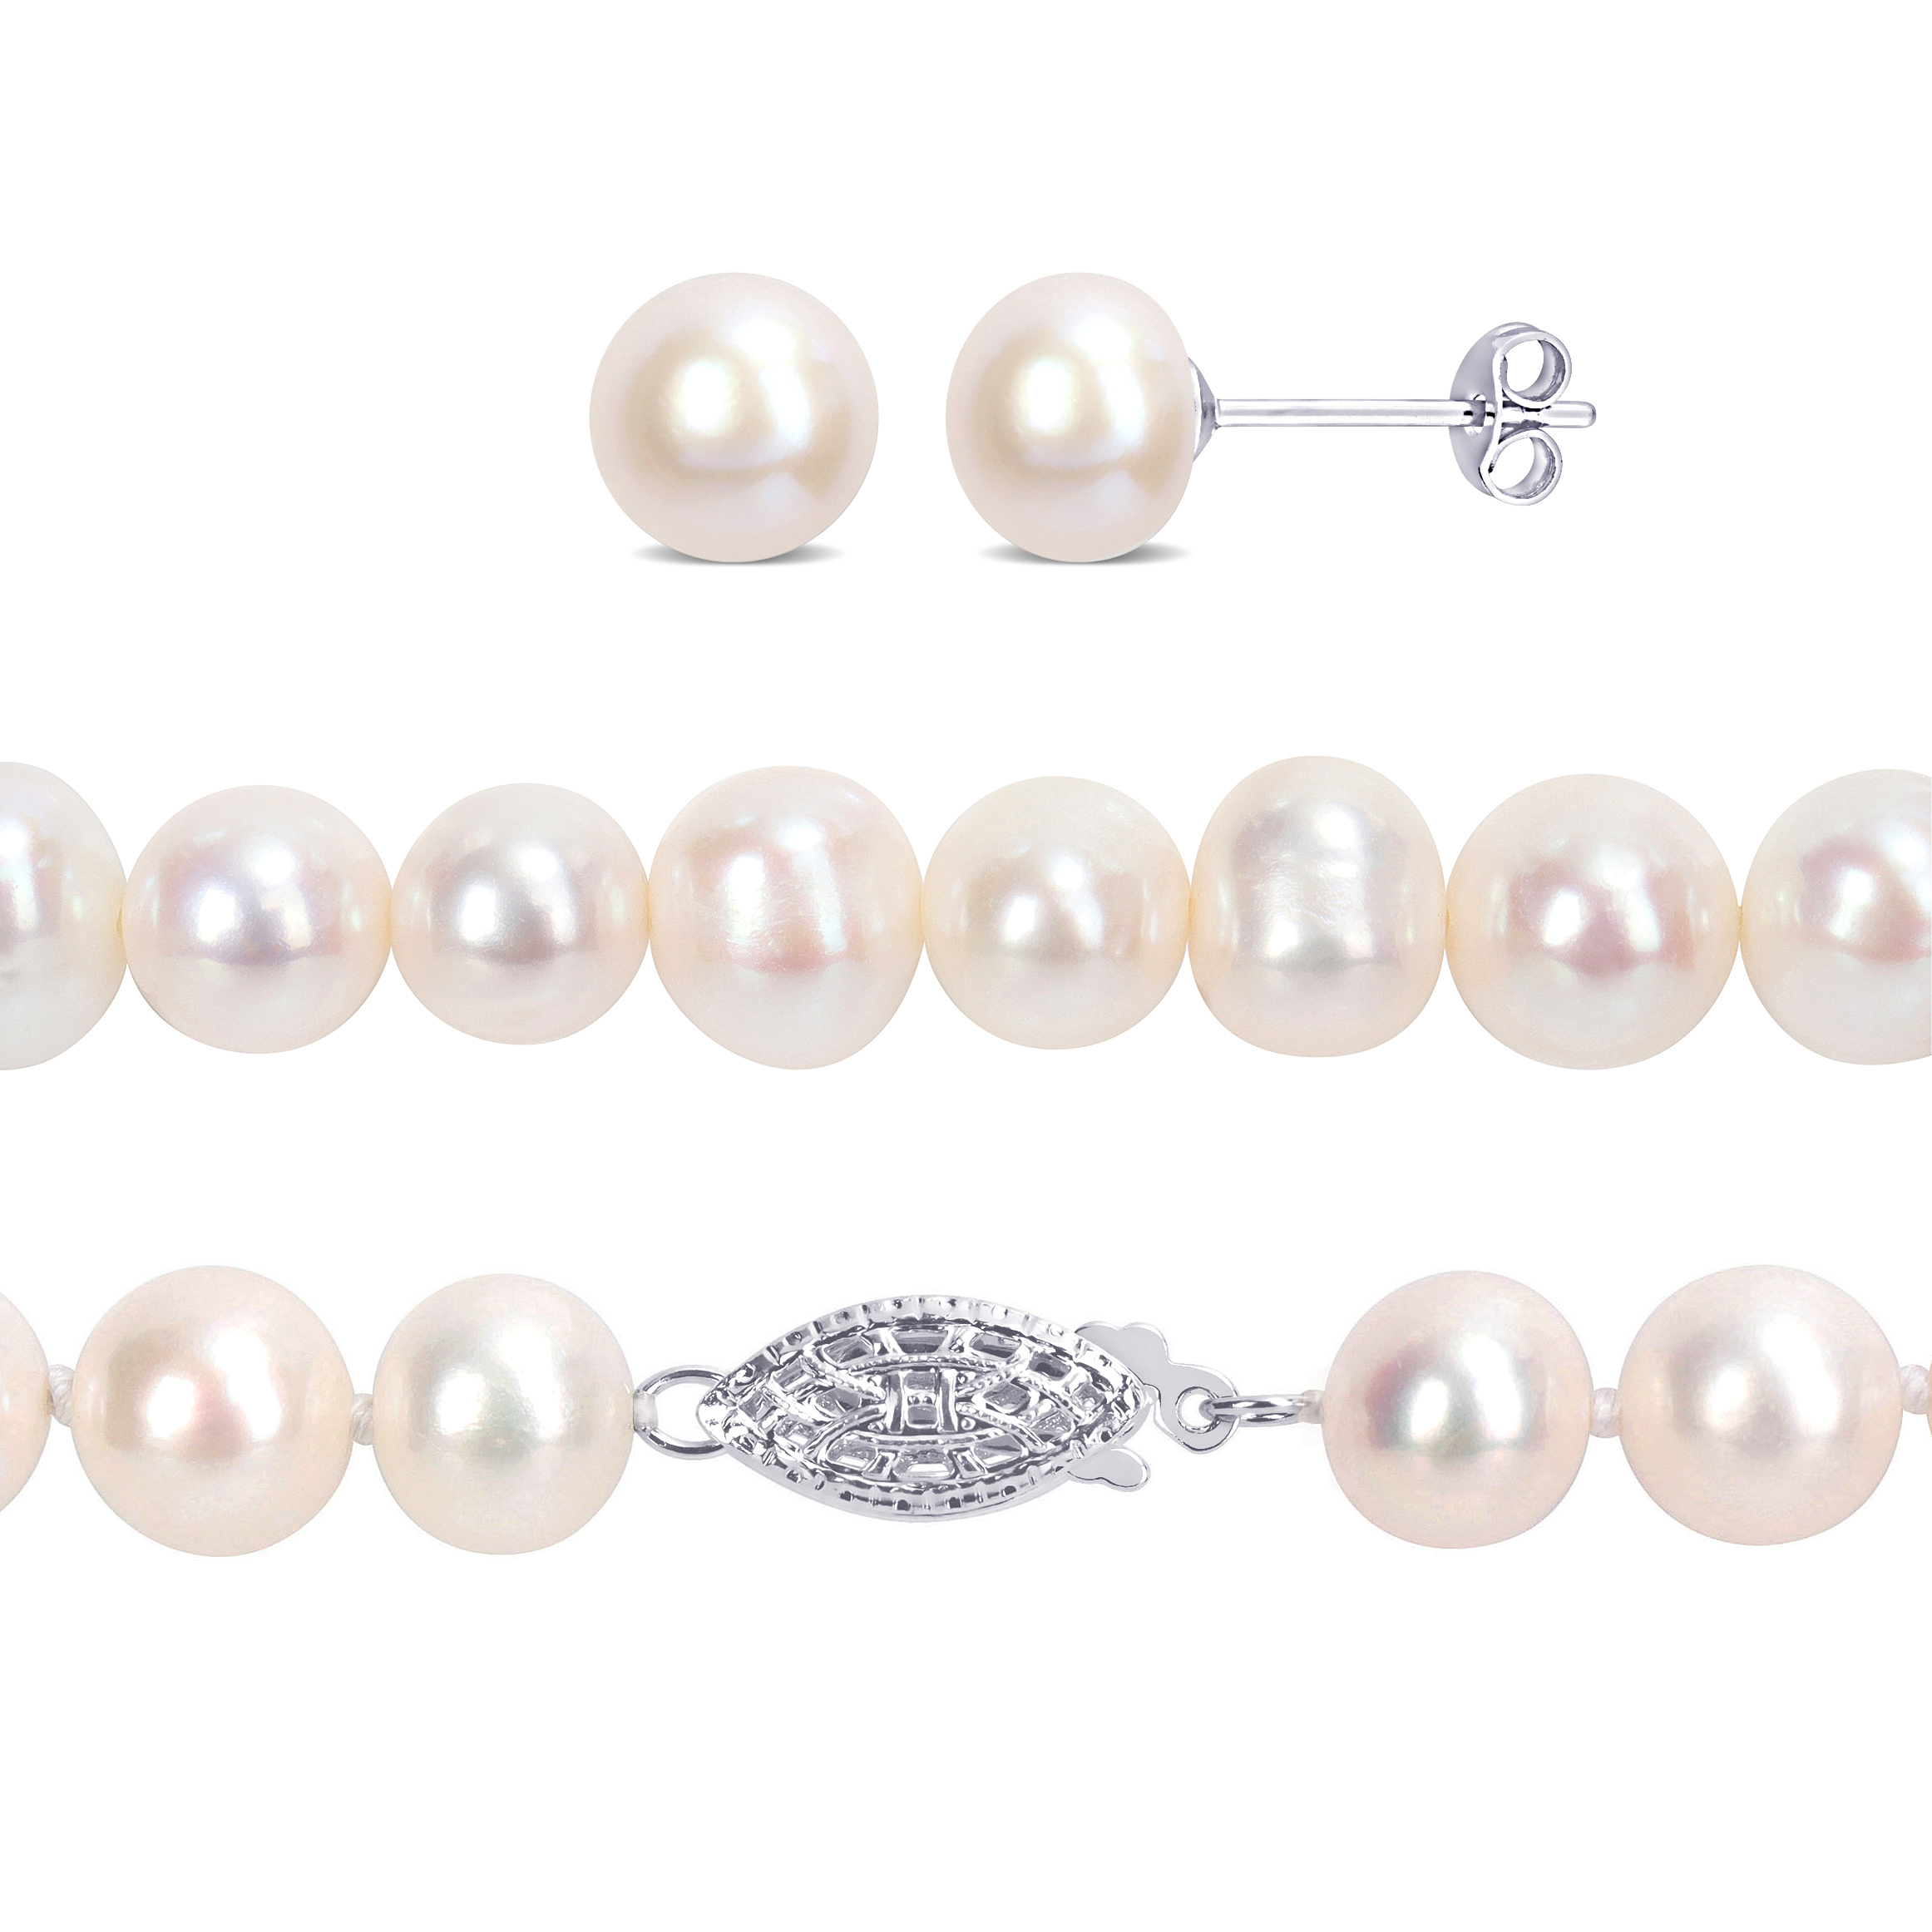 7.5-8 MM Freshwater Cultured Pearl 3-Piece Set of Necklace Earrings and Bracelet in Sterling Silver